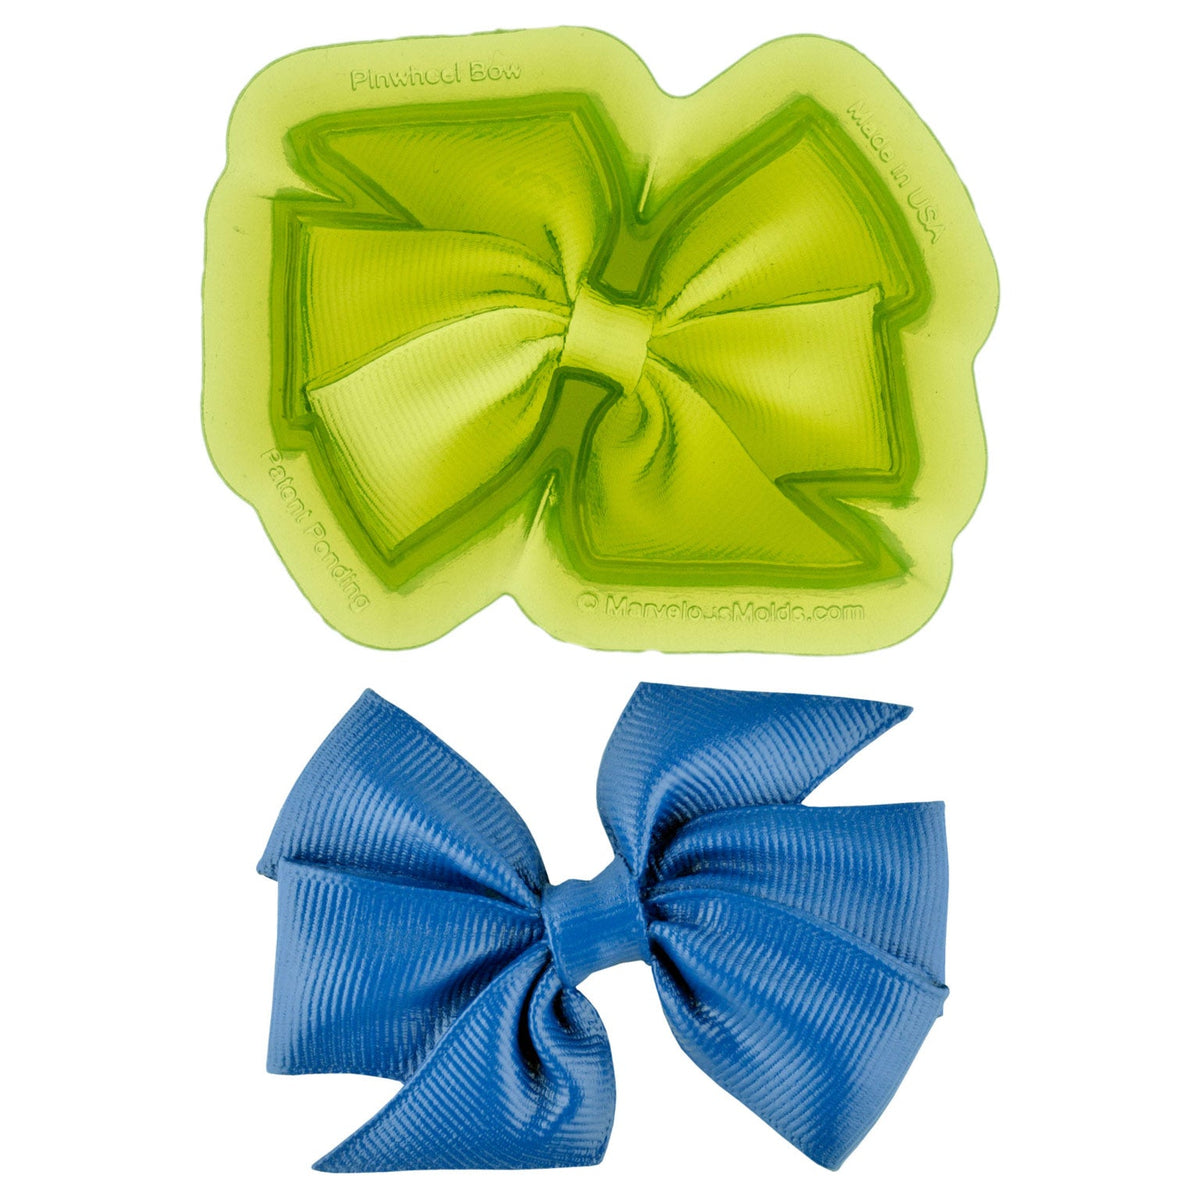 Pinwheel Bow Food Safe Silicone Mold for Fondant Cake Decorating by Marvelous Molds